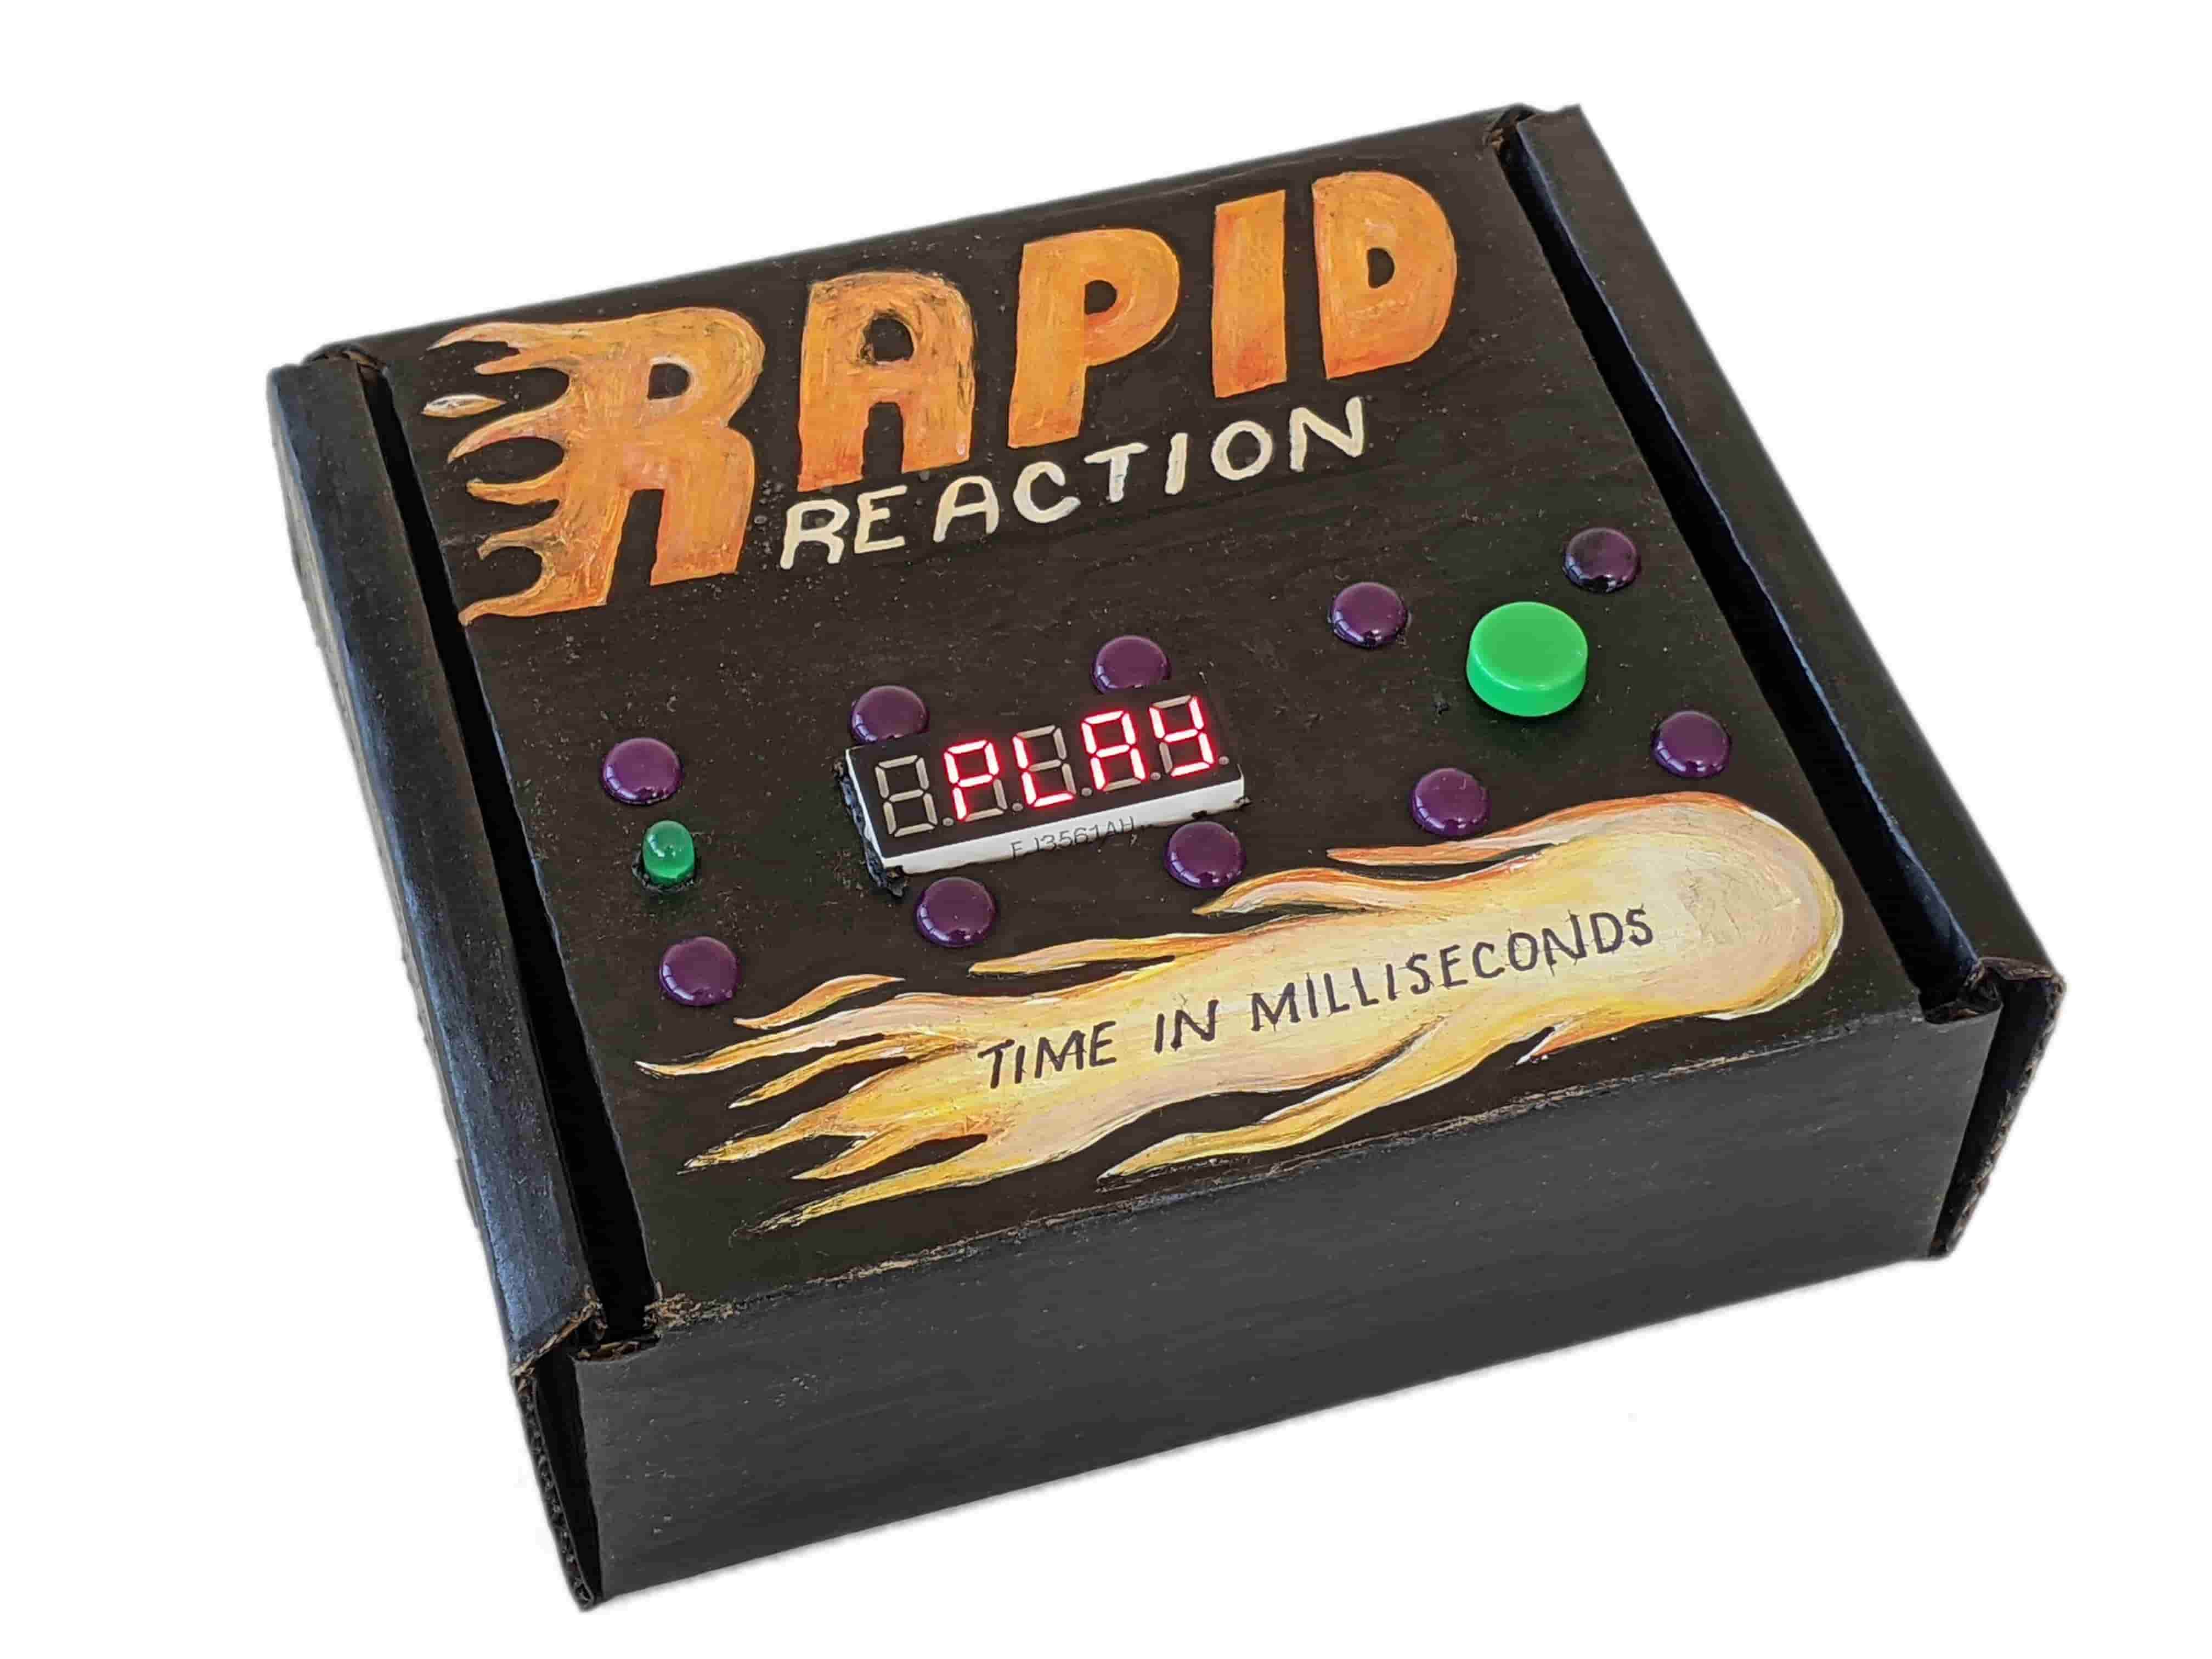 Invention Engine Rapid Reaction game